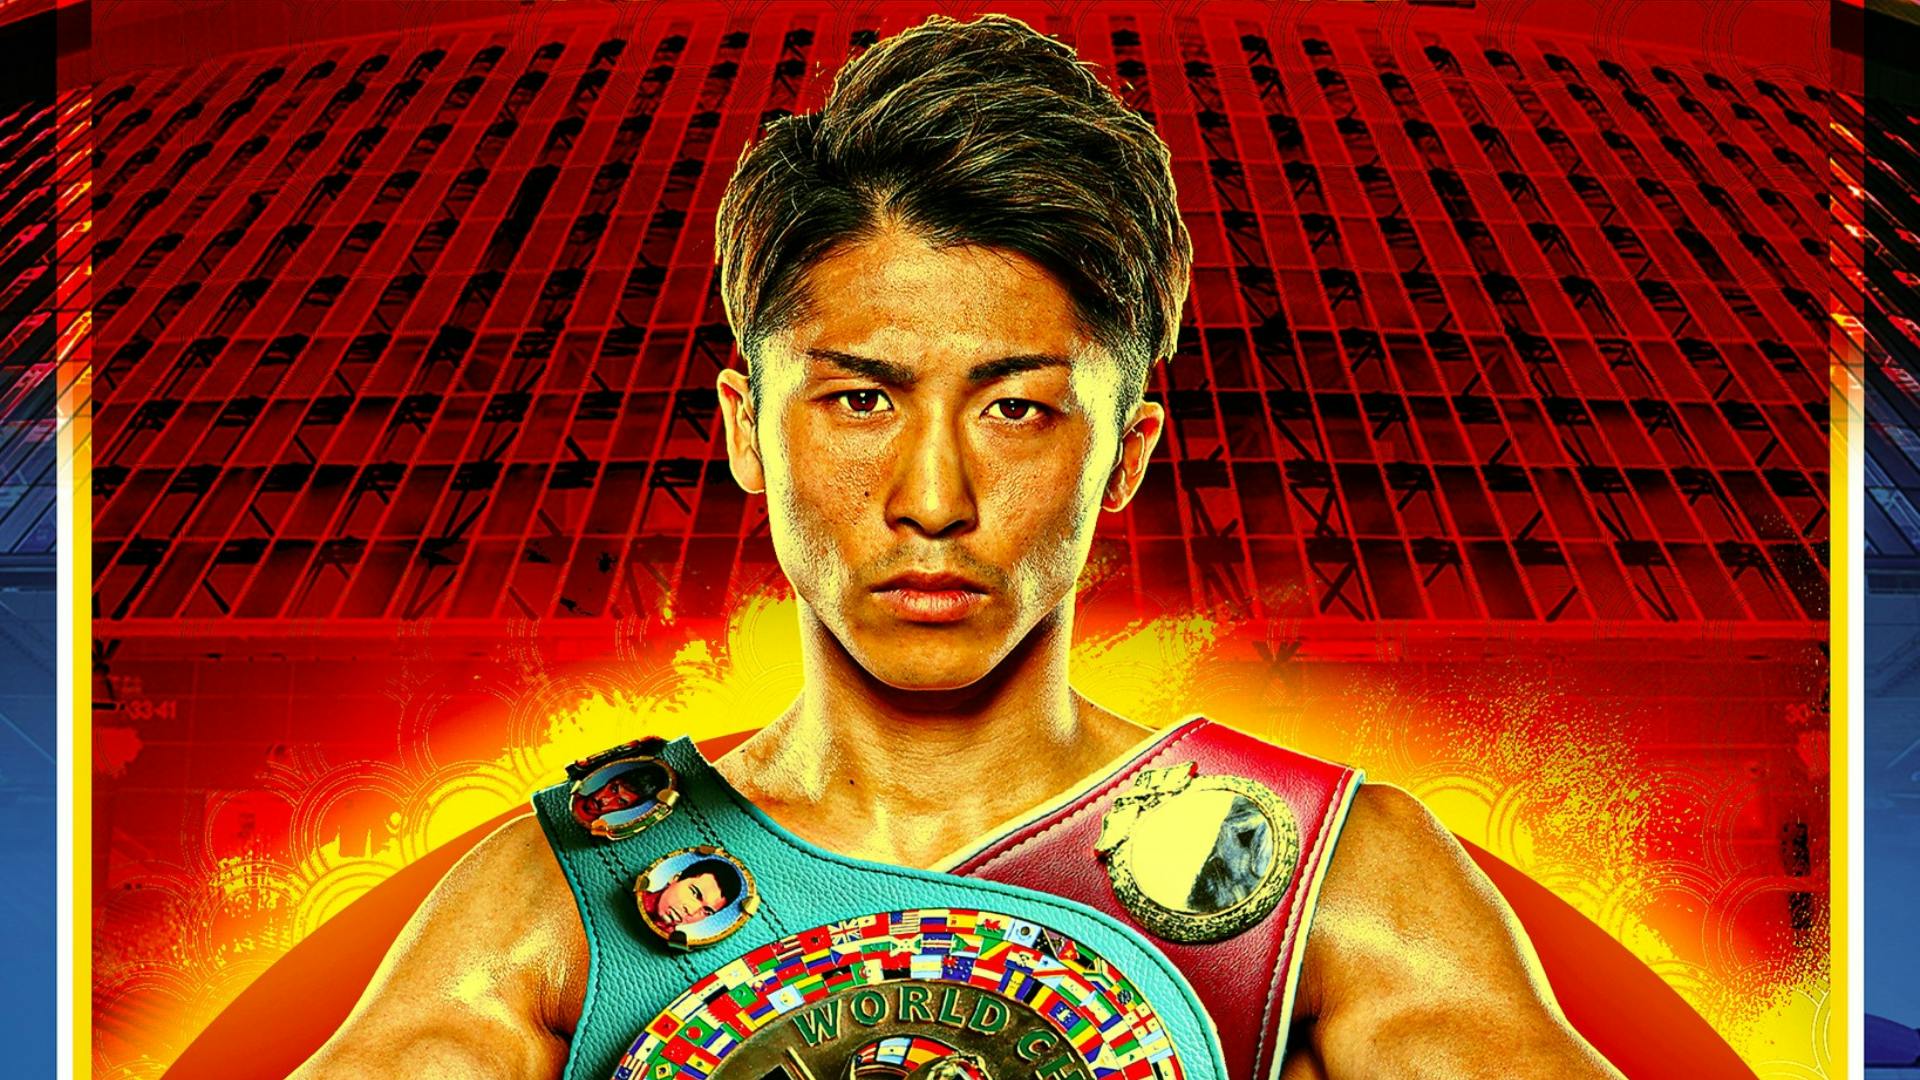 Monster among men: Naoya Inoue keeps Undisputed title with vicious KO of Luis Nery